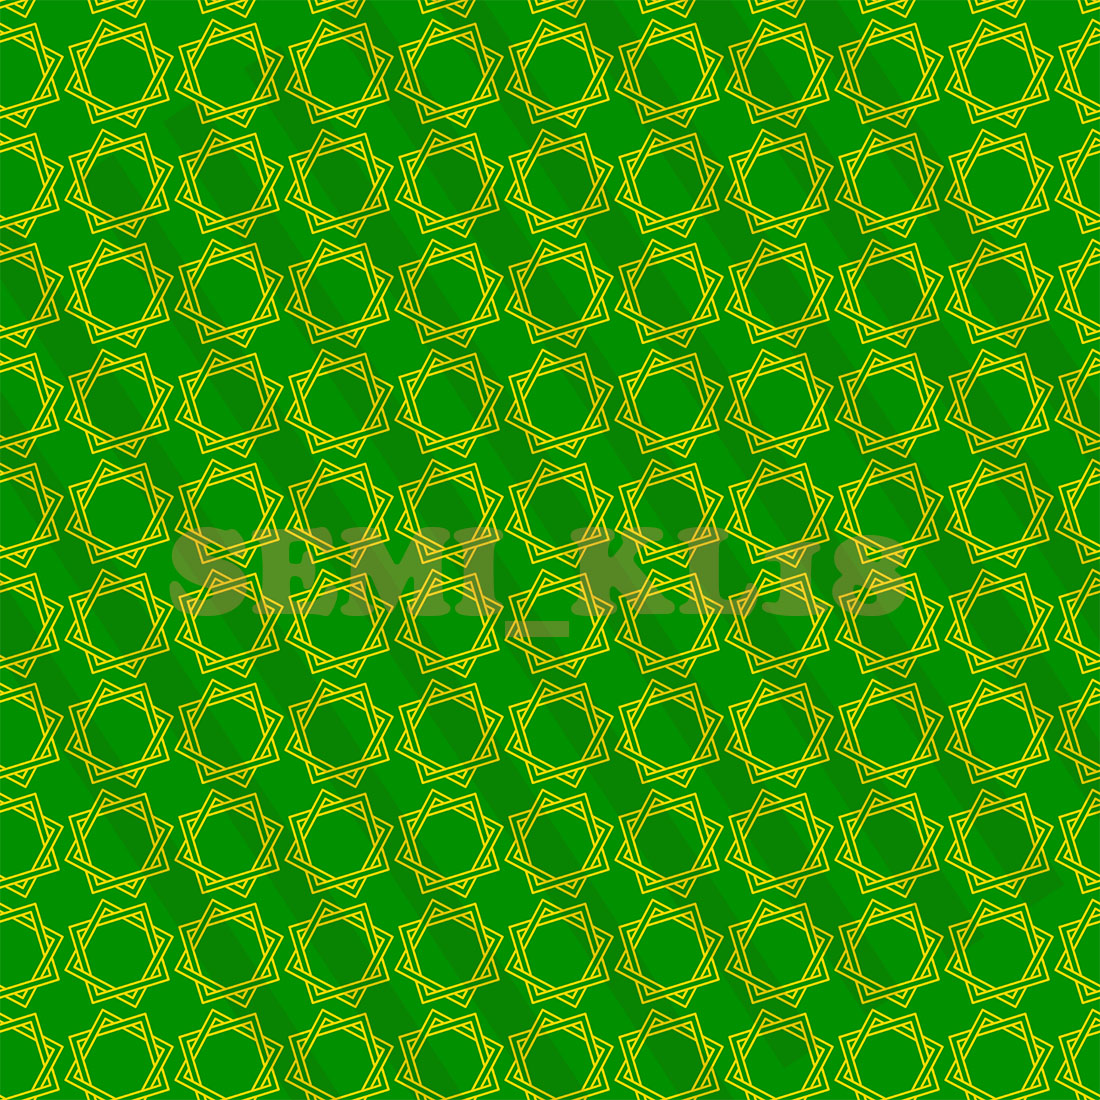 Green background with a pattern of circles.